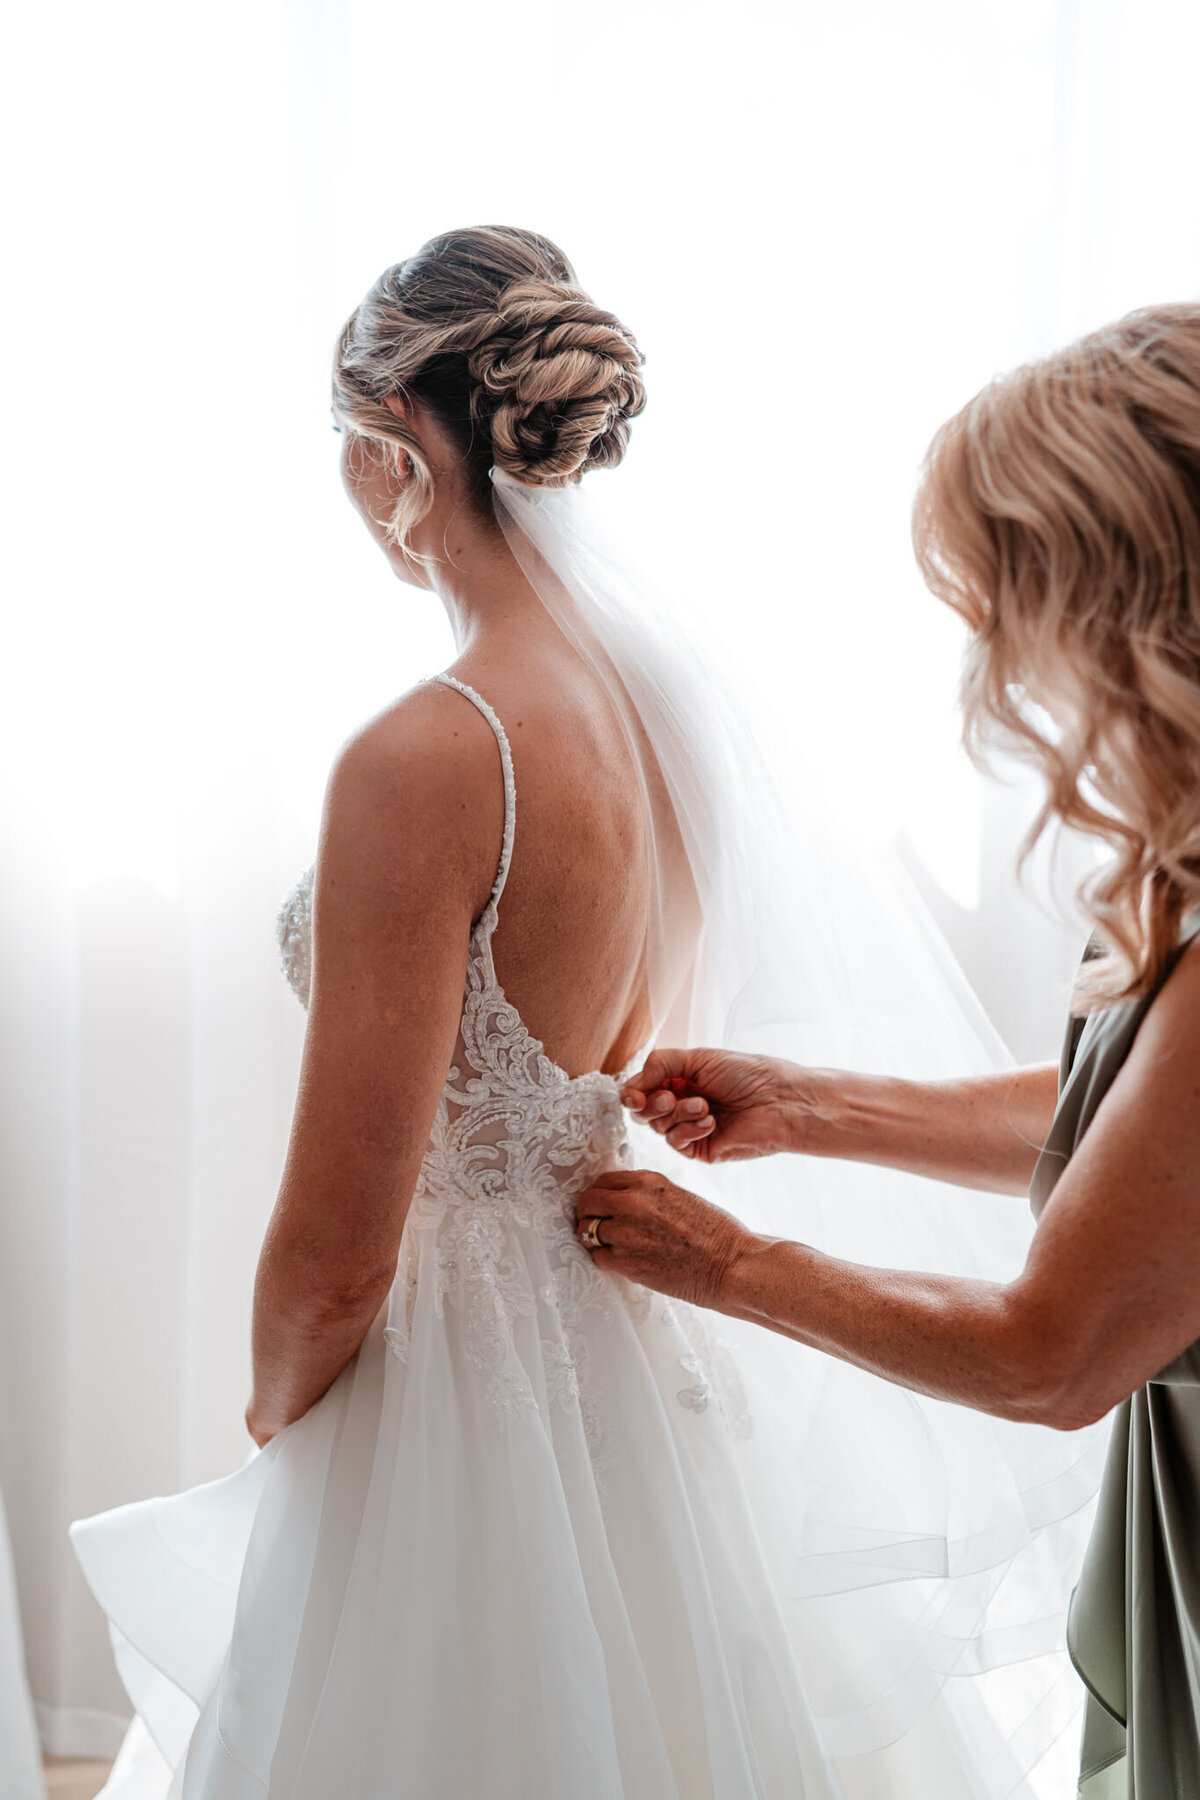 Emily getting her wedding dress perfectly ready for her wedding ceremony